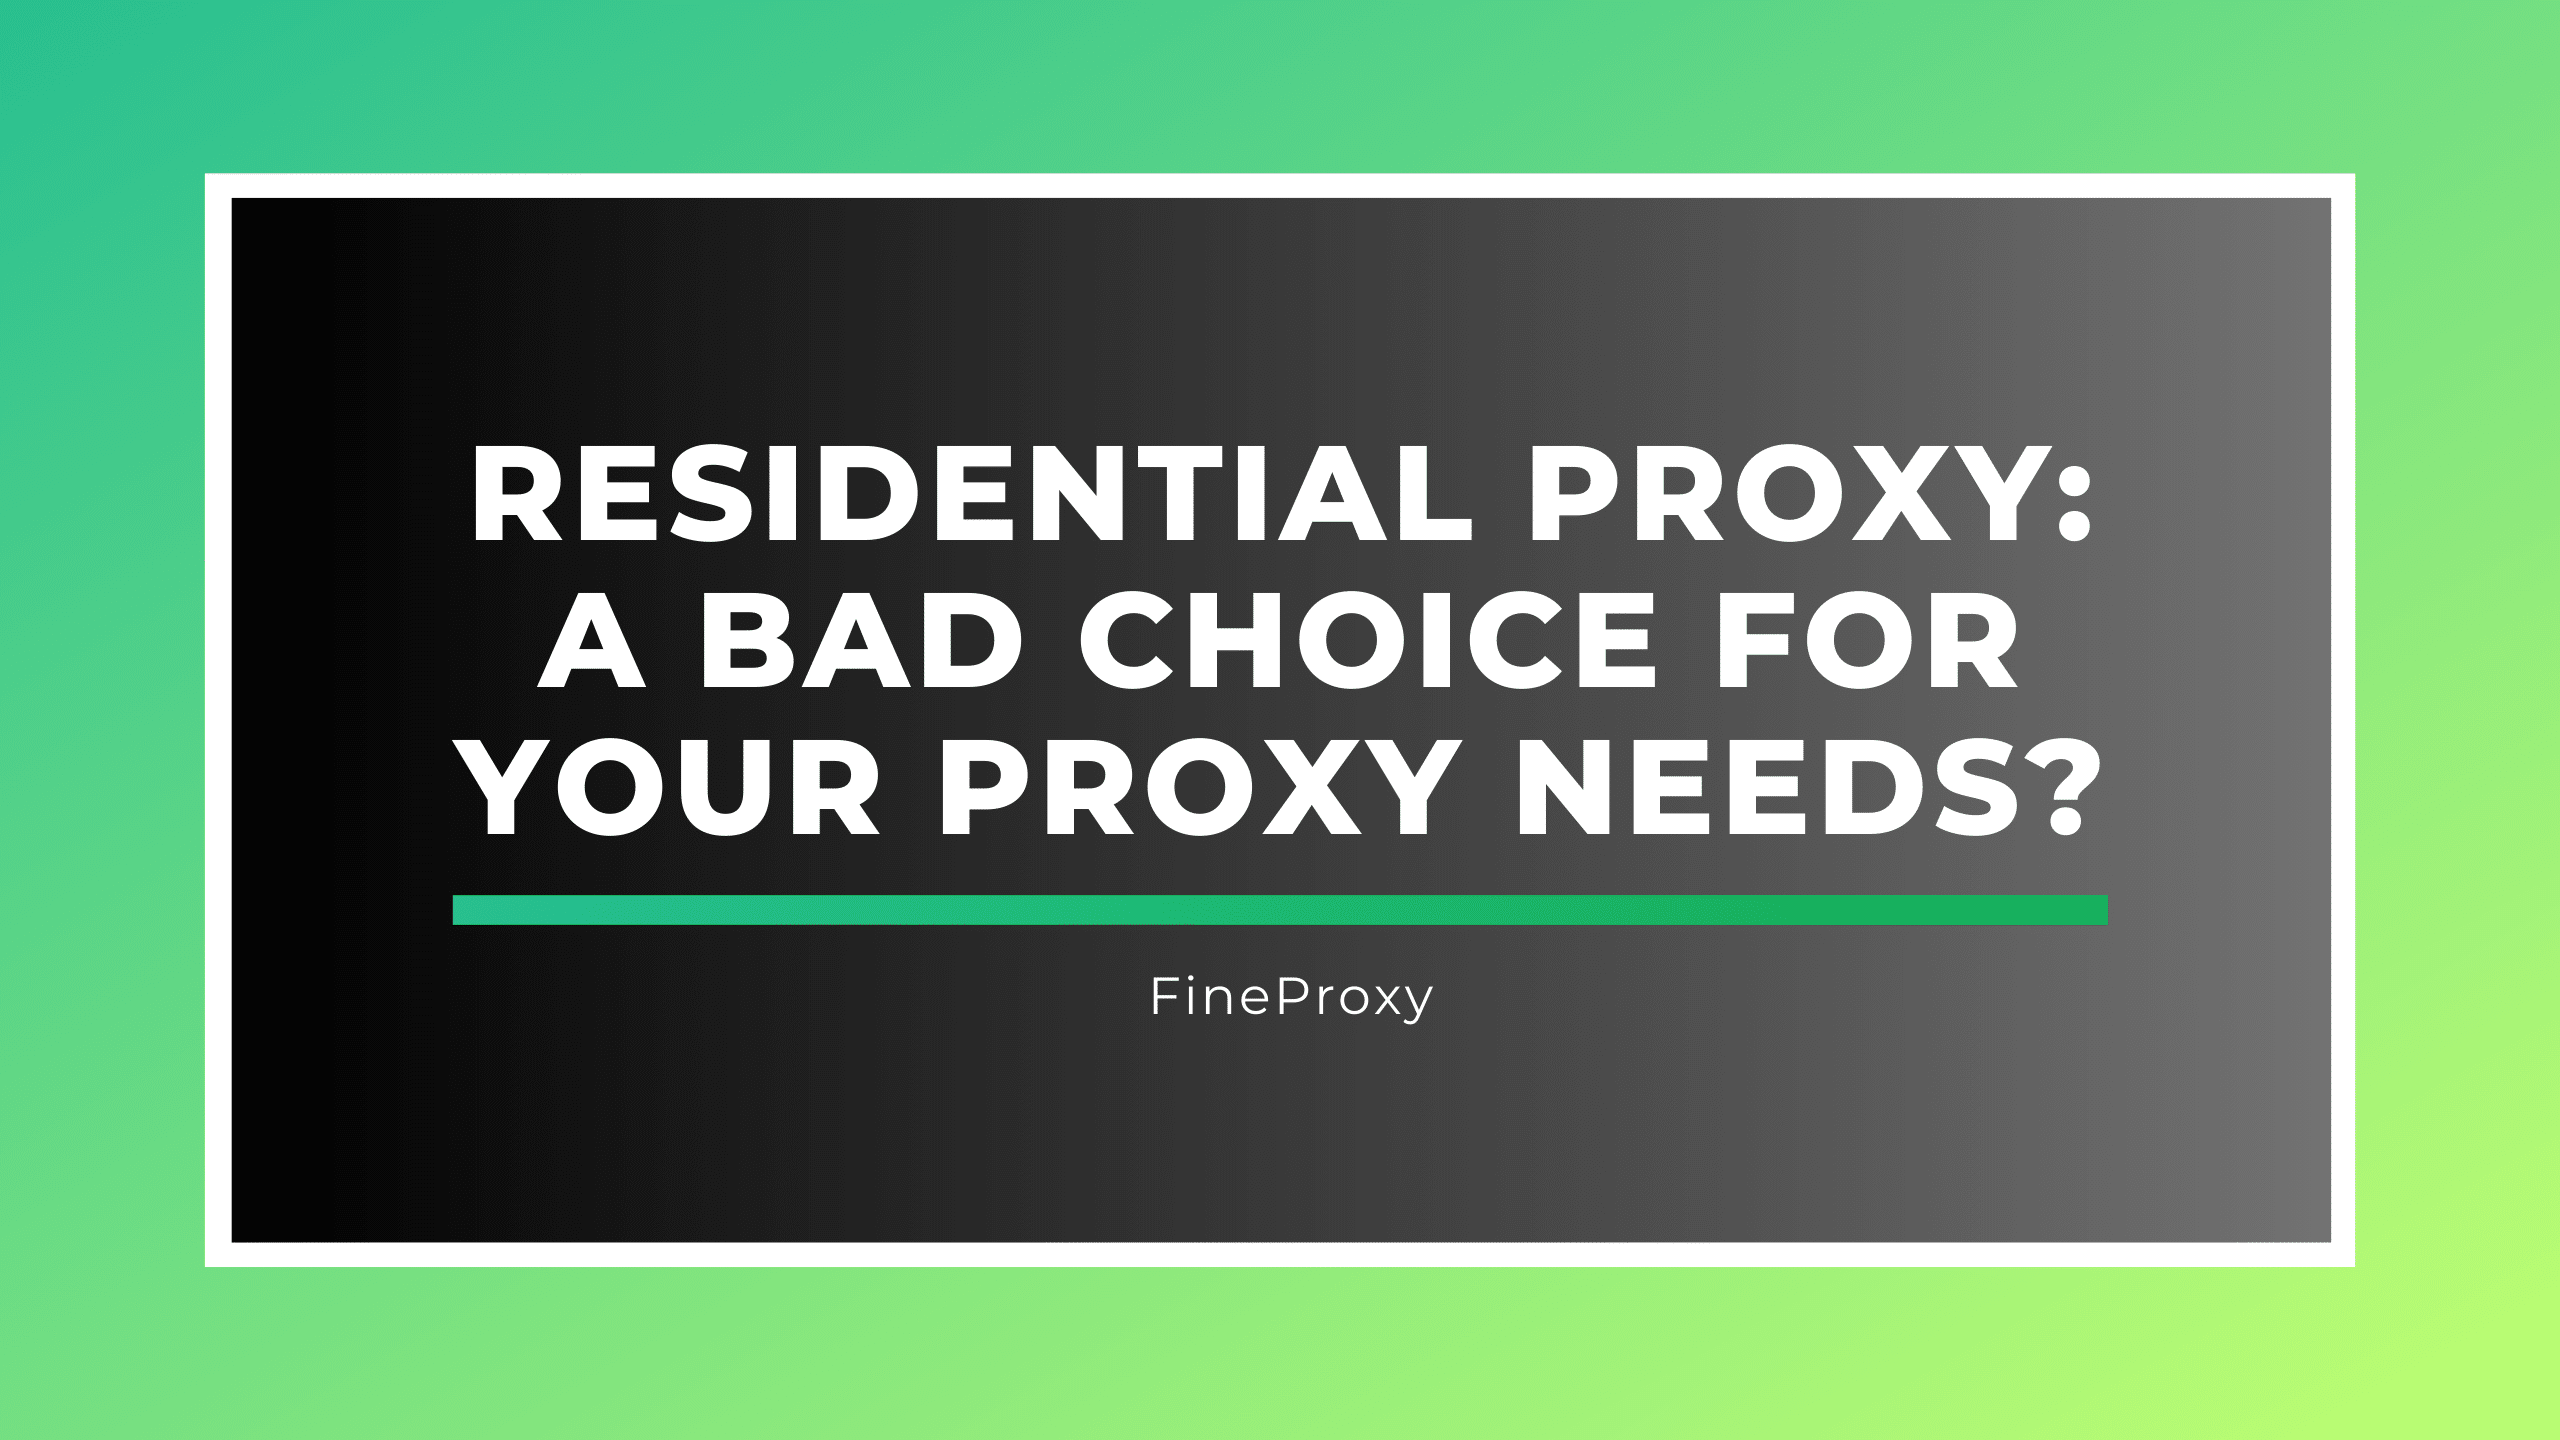 Residential Proxy: A Bad Choice for Your Proxy Needs?